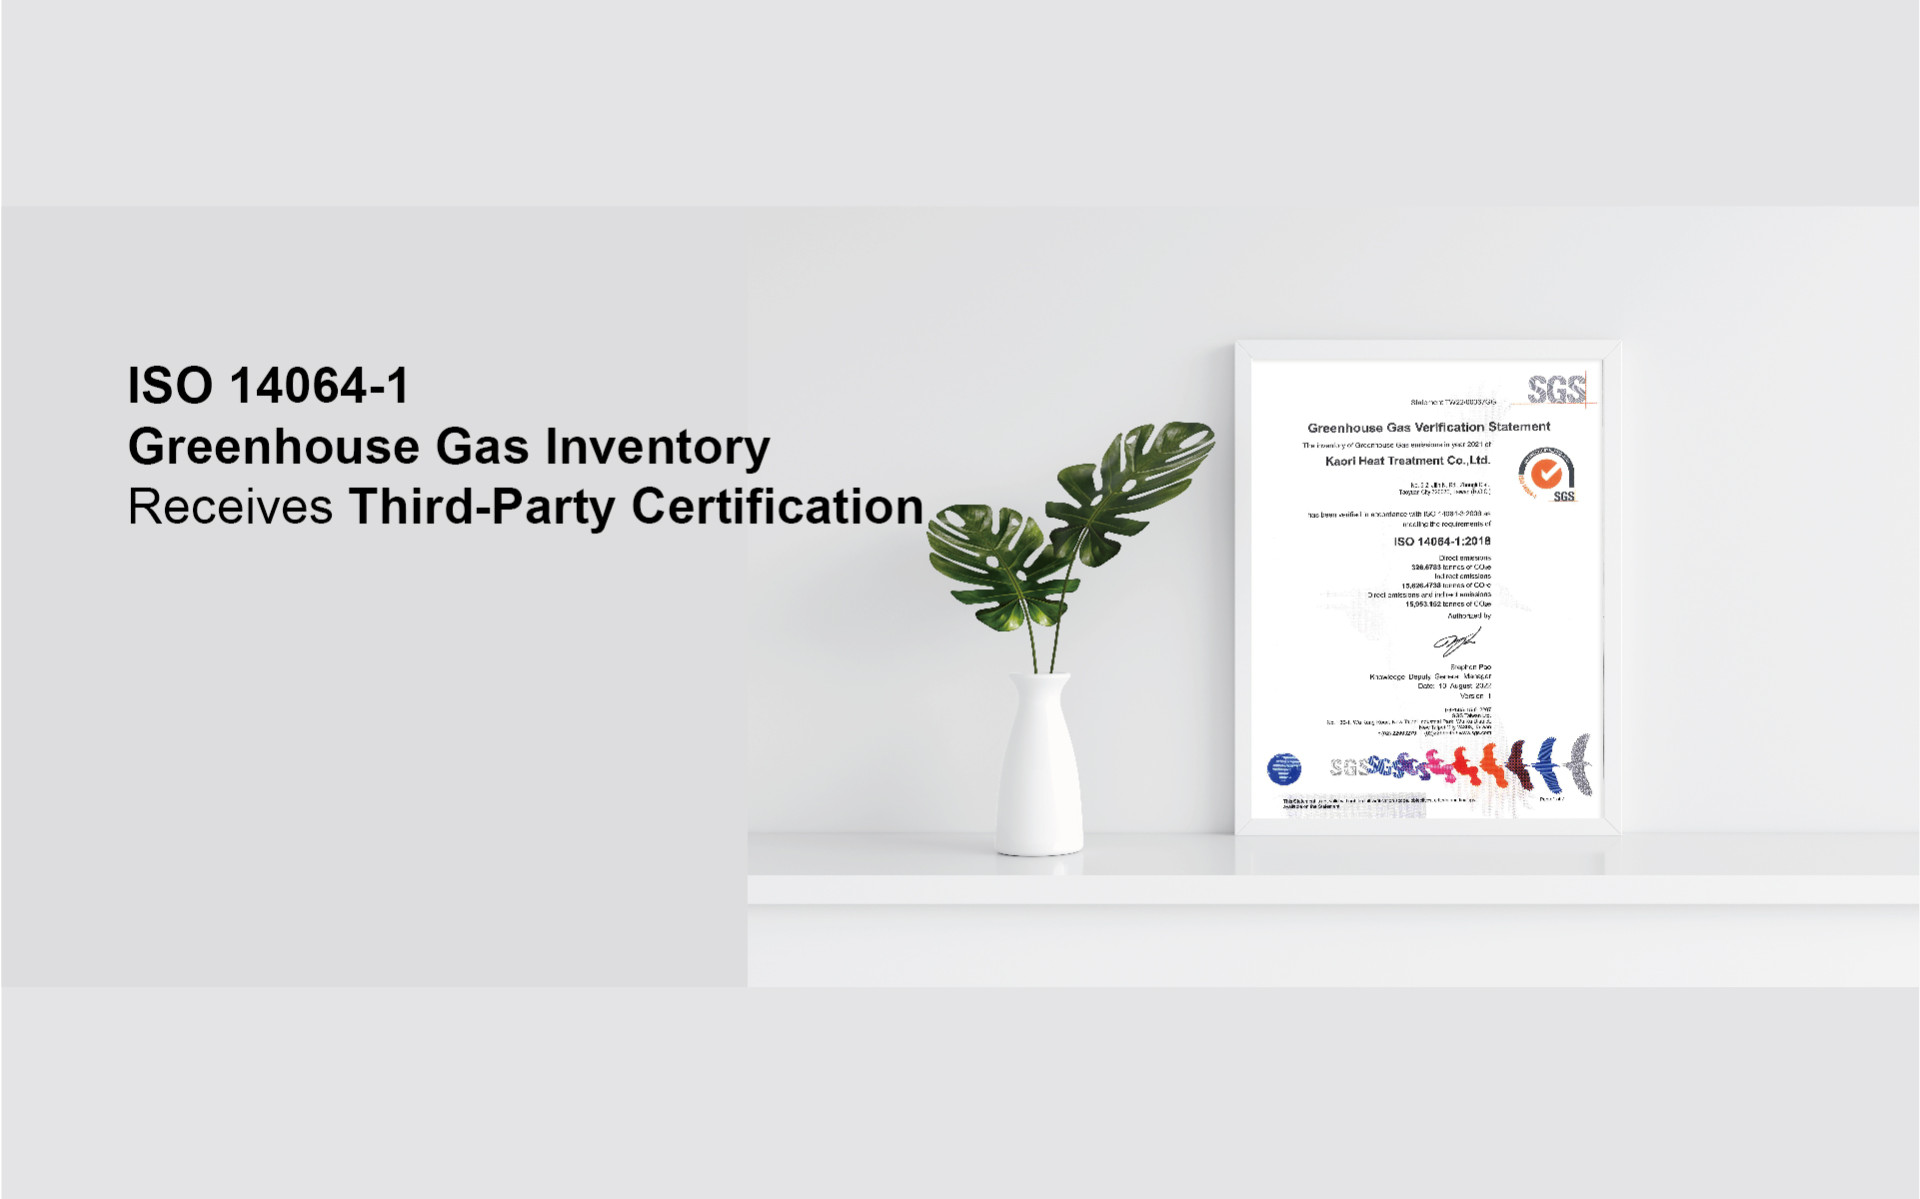  ISO 14064-1 Greenhouse Gas Inventory Receives Third-Party Certification 